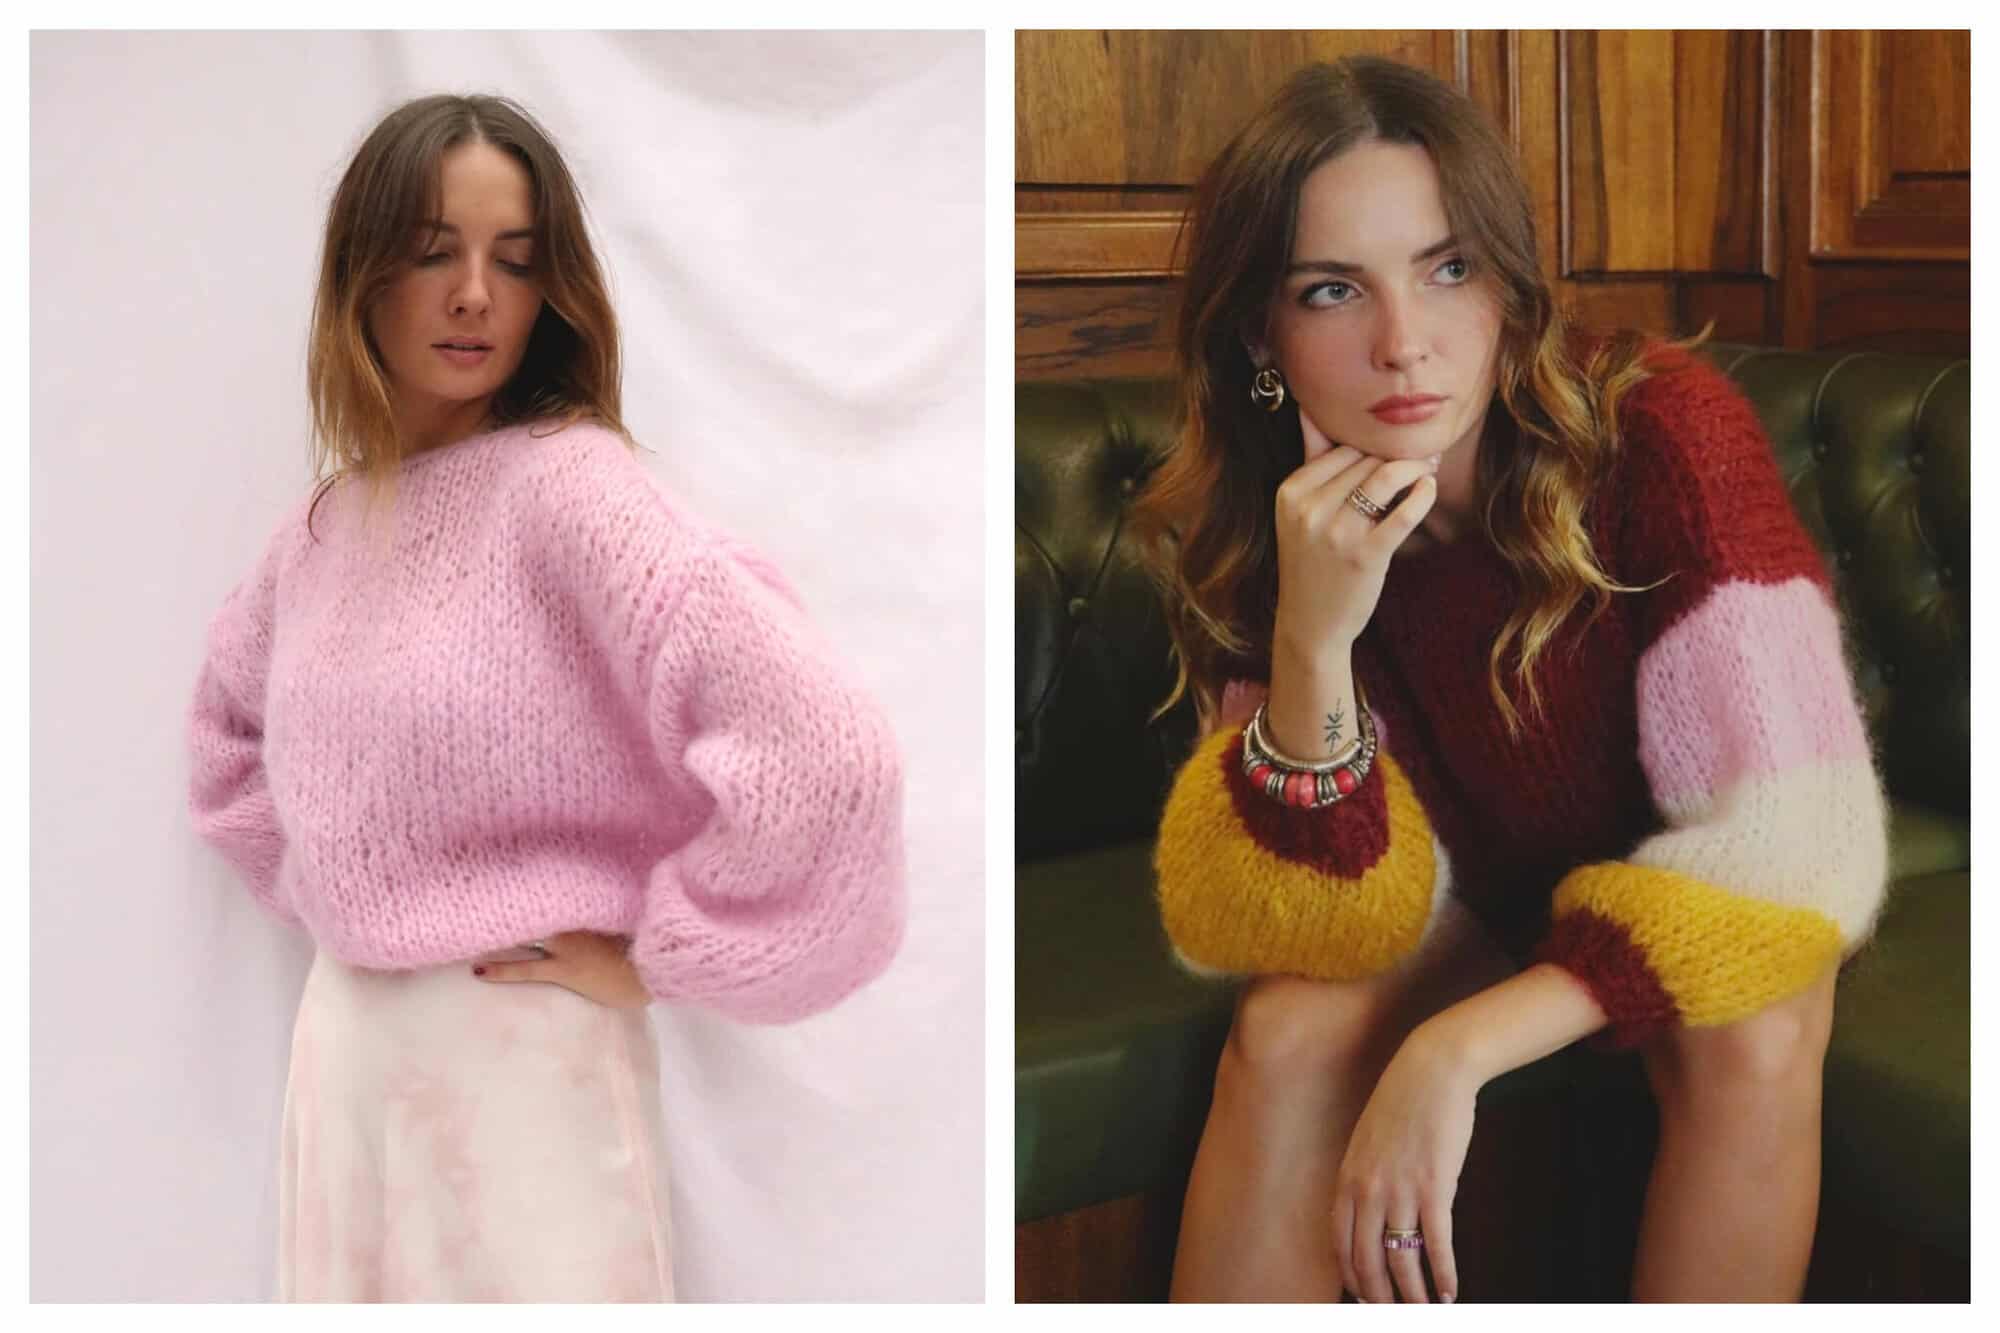 Left: a woman with dark blonde hair standing against a white background. She is wearing an over sized light pink sweater and a light pink and white skirt. Right: a woman with dark blonde hair is sitting on a dark green leather couch and looking off into the distance. She is wearing a dark red, light pink, white, and yellow over sized sweater.